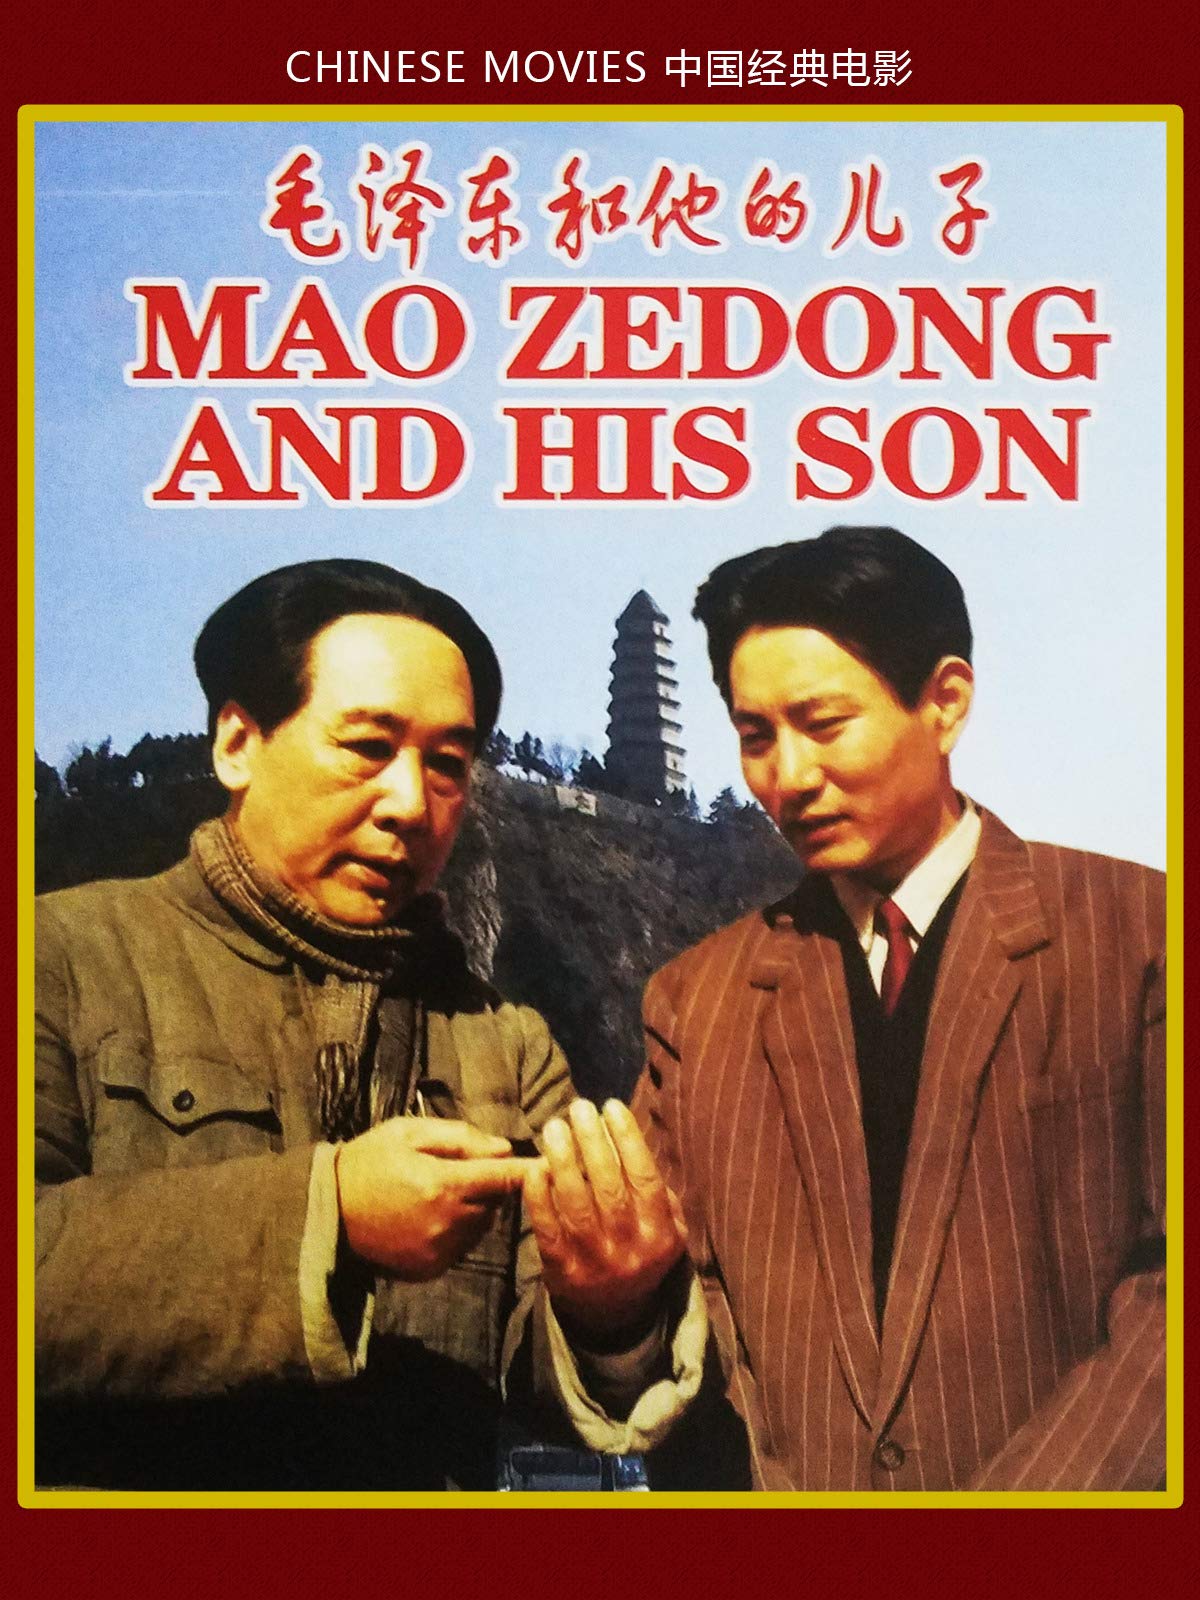 Mao Zedong and His Son